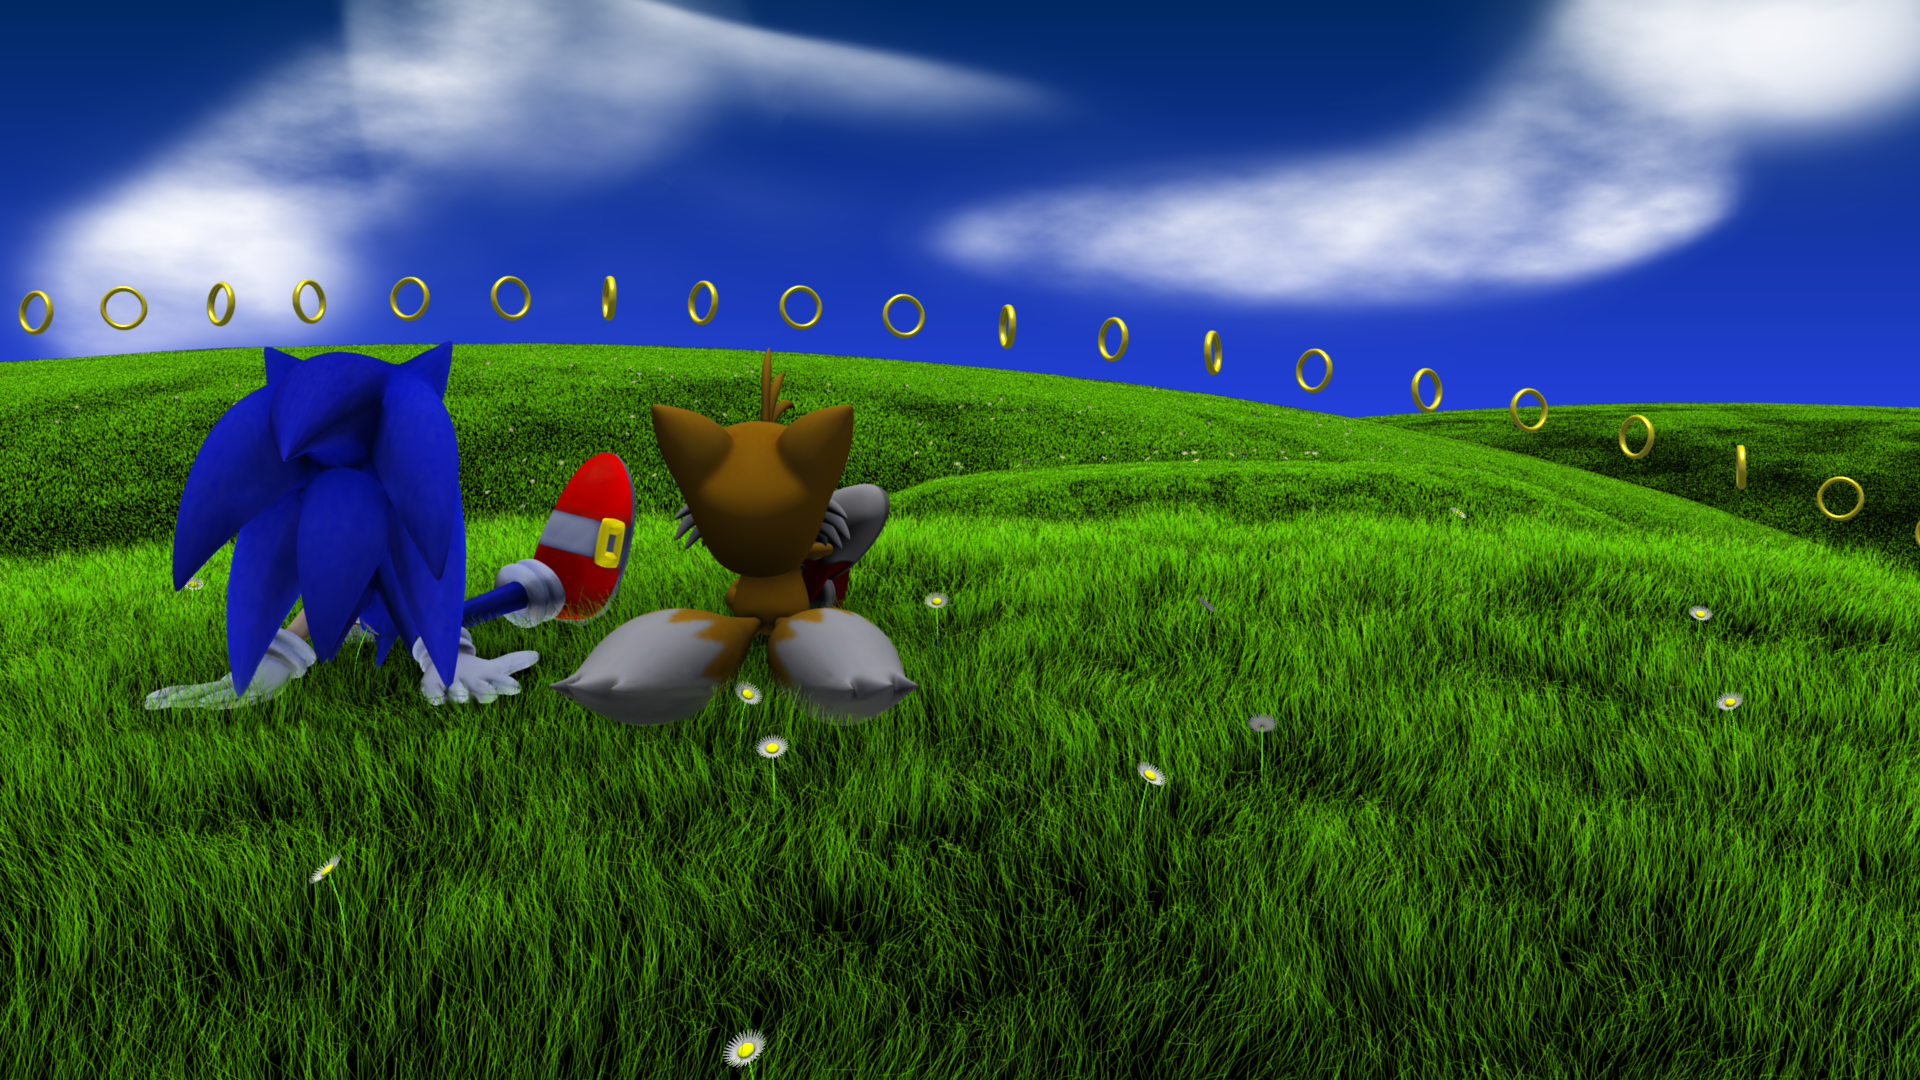 3D Sonic Desktop Wallpapers by Compense The Sonic Stadium